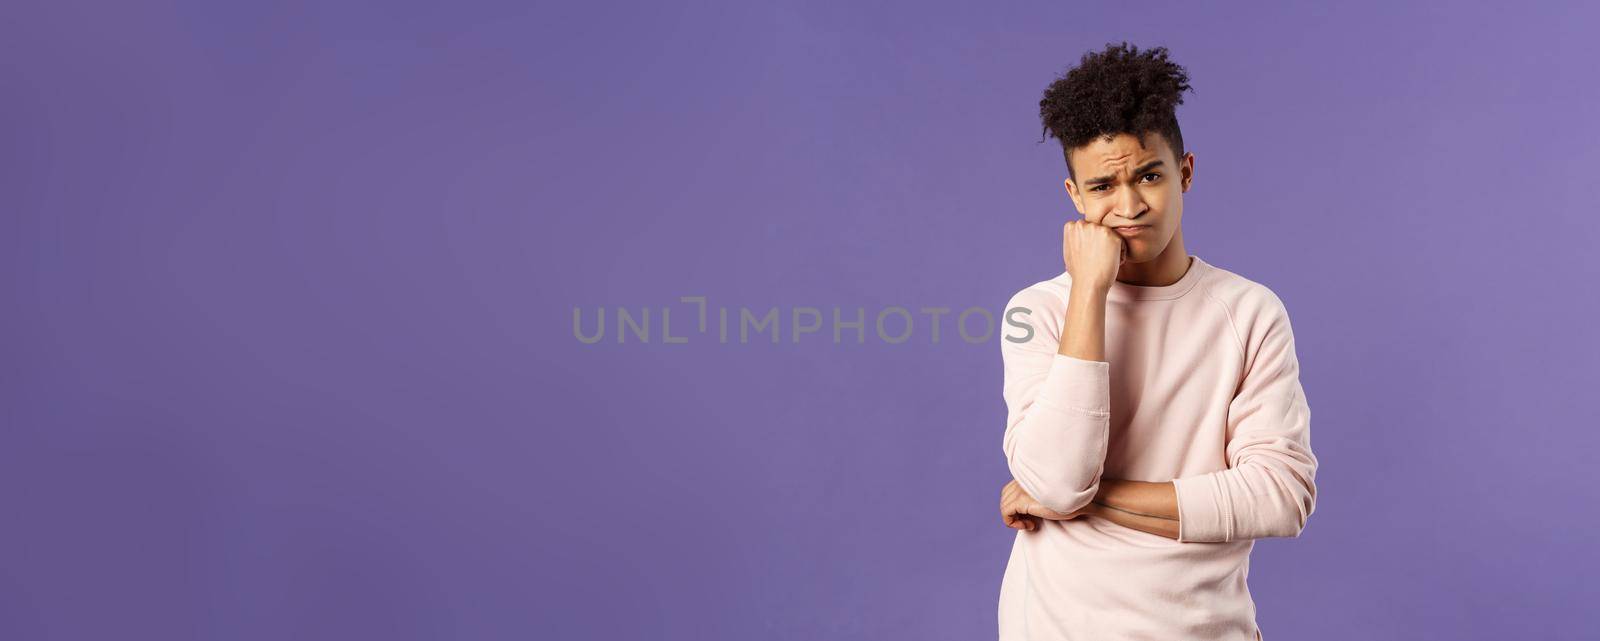 Portrait of complicated, troubled young hispanic man facing tough problem, lean on fist grimacing and pouting, solving troublesome situation, thinking, feeling uneasy, purple background.